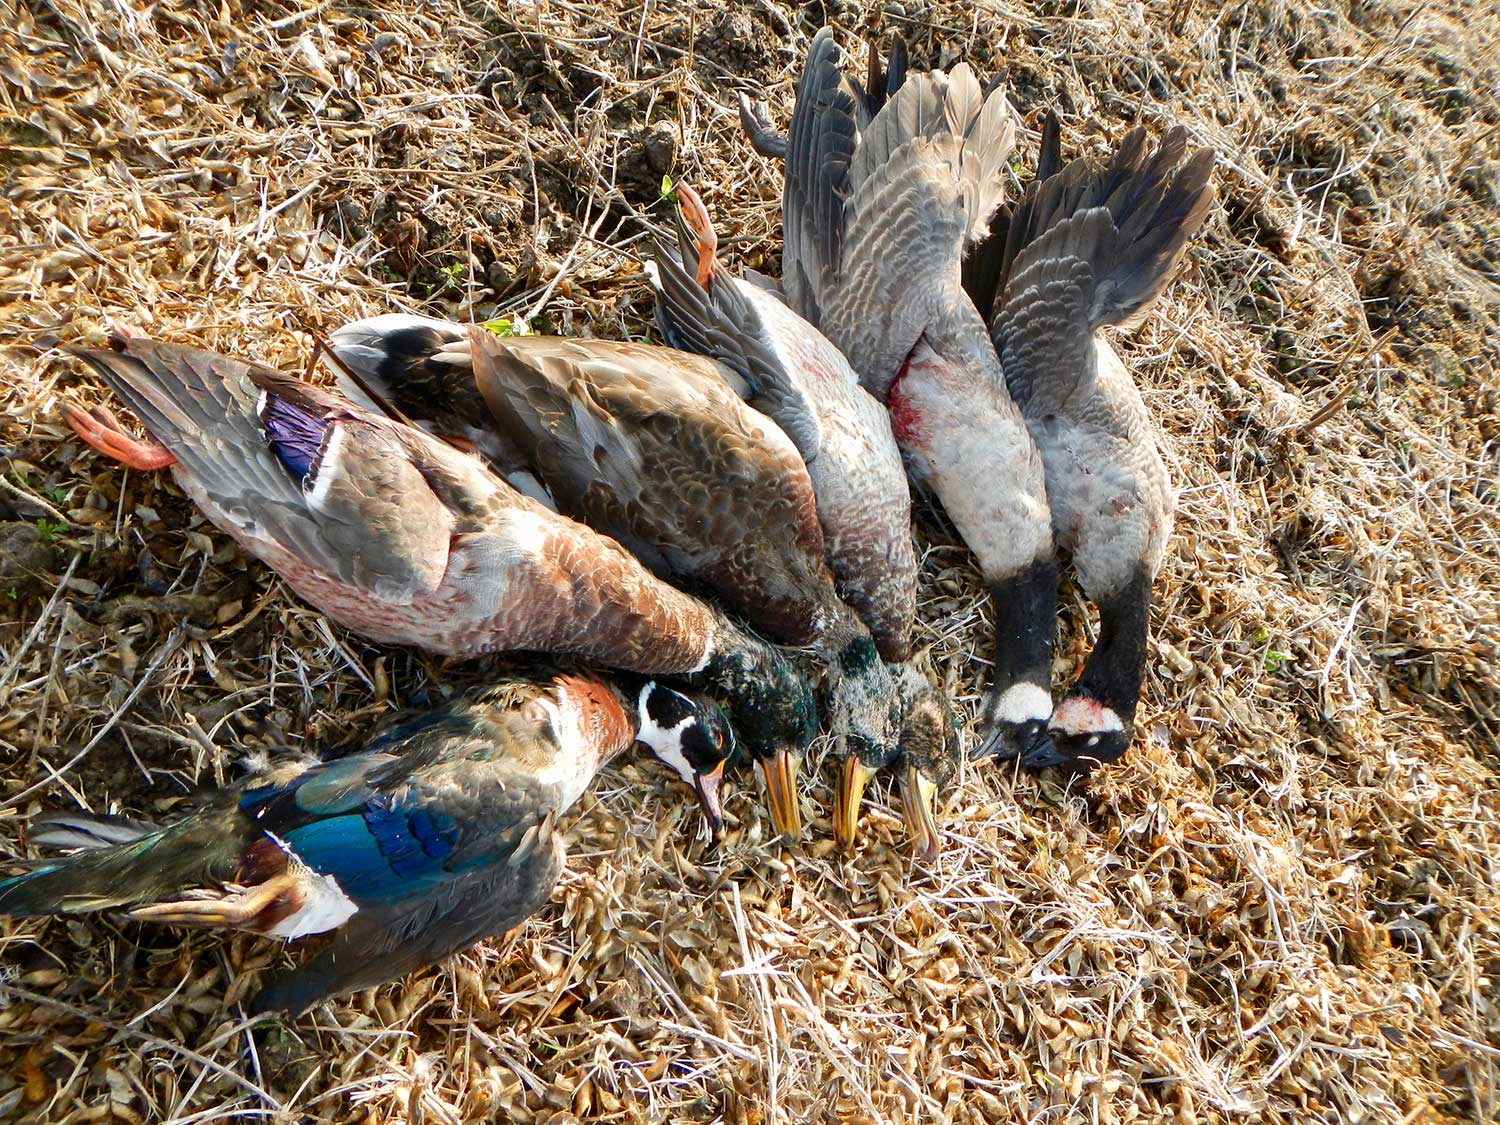 A limit of early-season duck species on the ground.